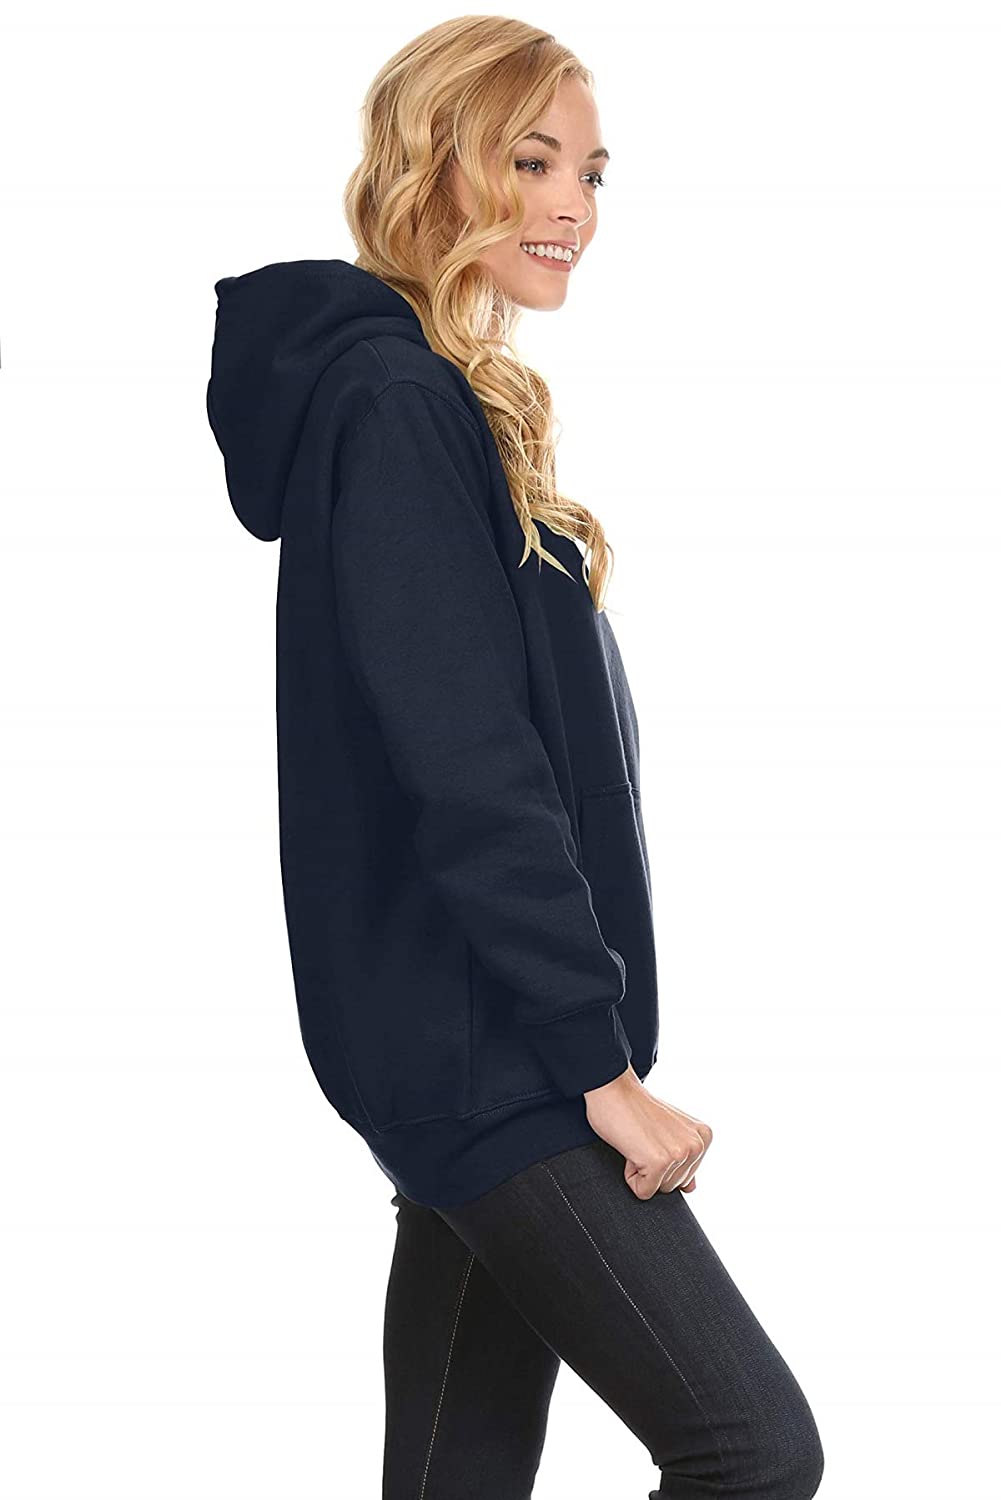 NavyBlue Hoodie For Women